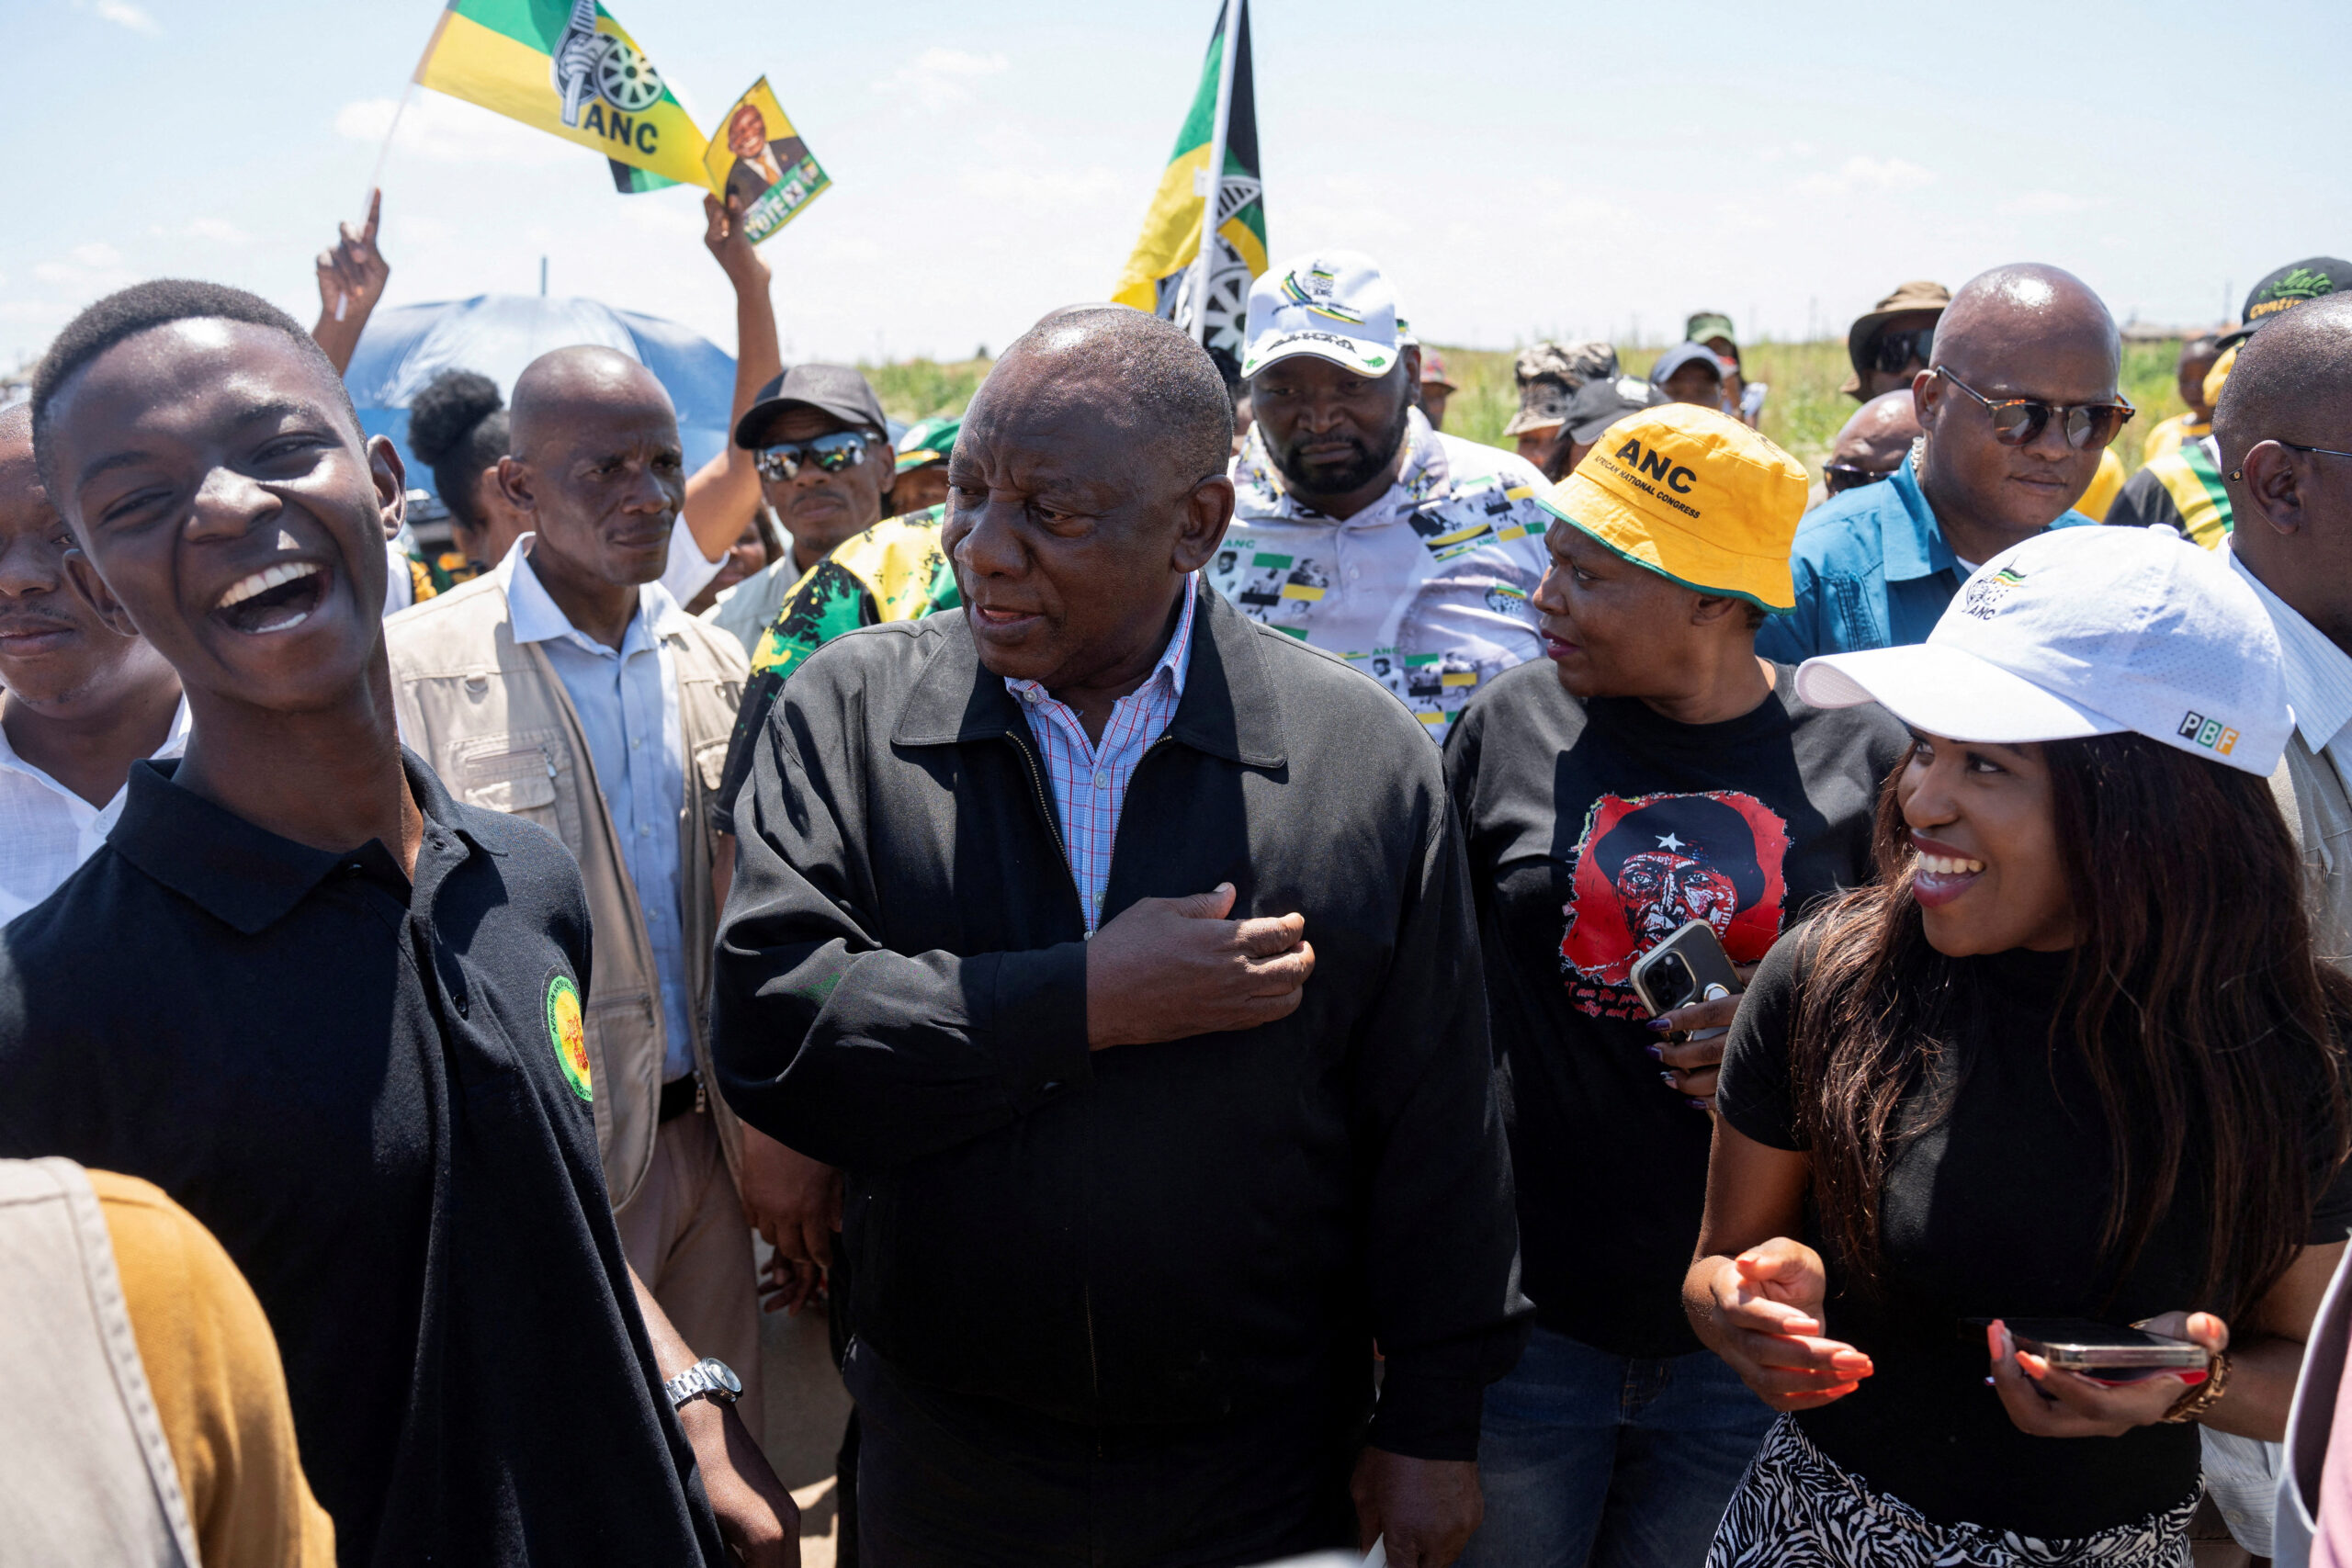 “South Africa’s 2024 Election: Date, Stakes for the ANC, and Political Dynamics”